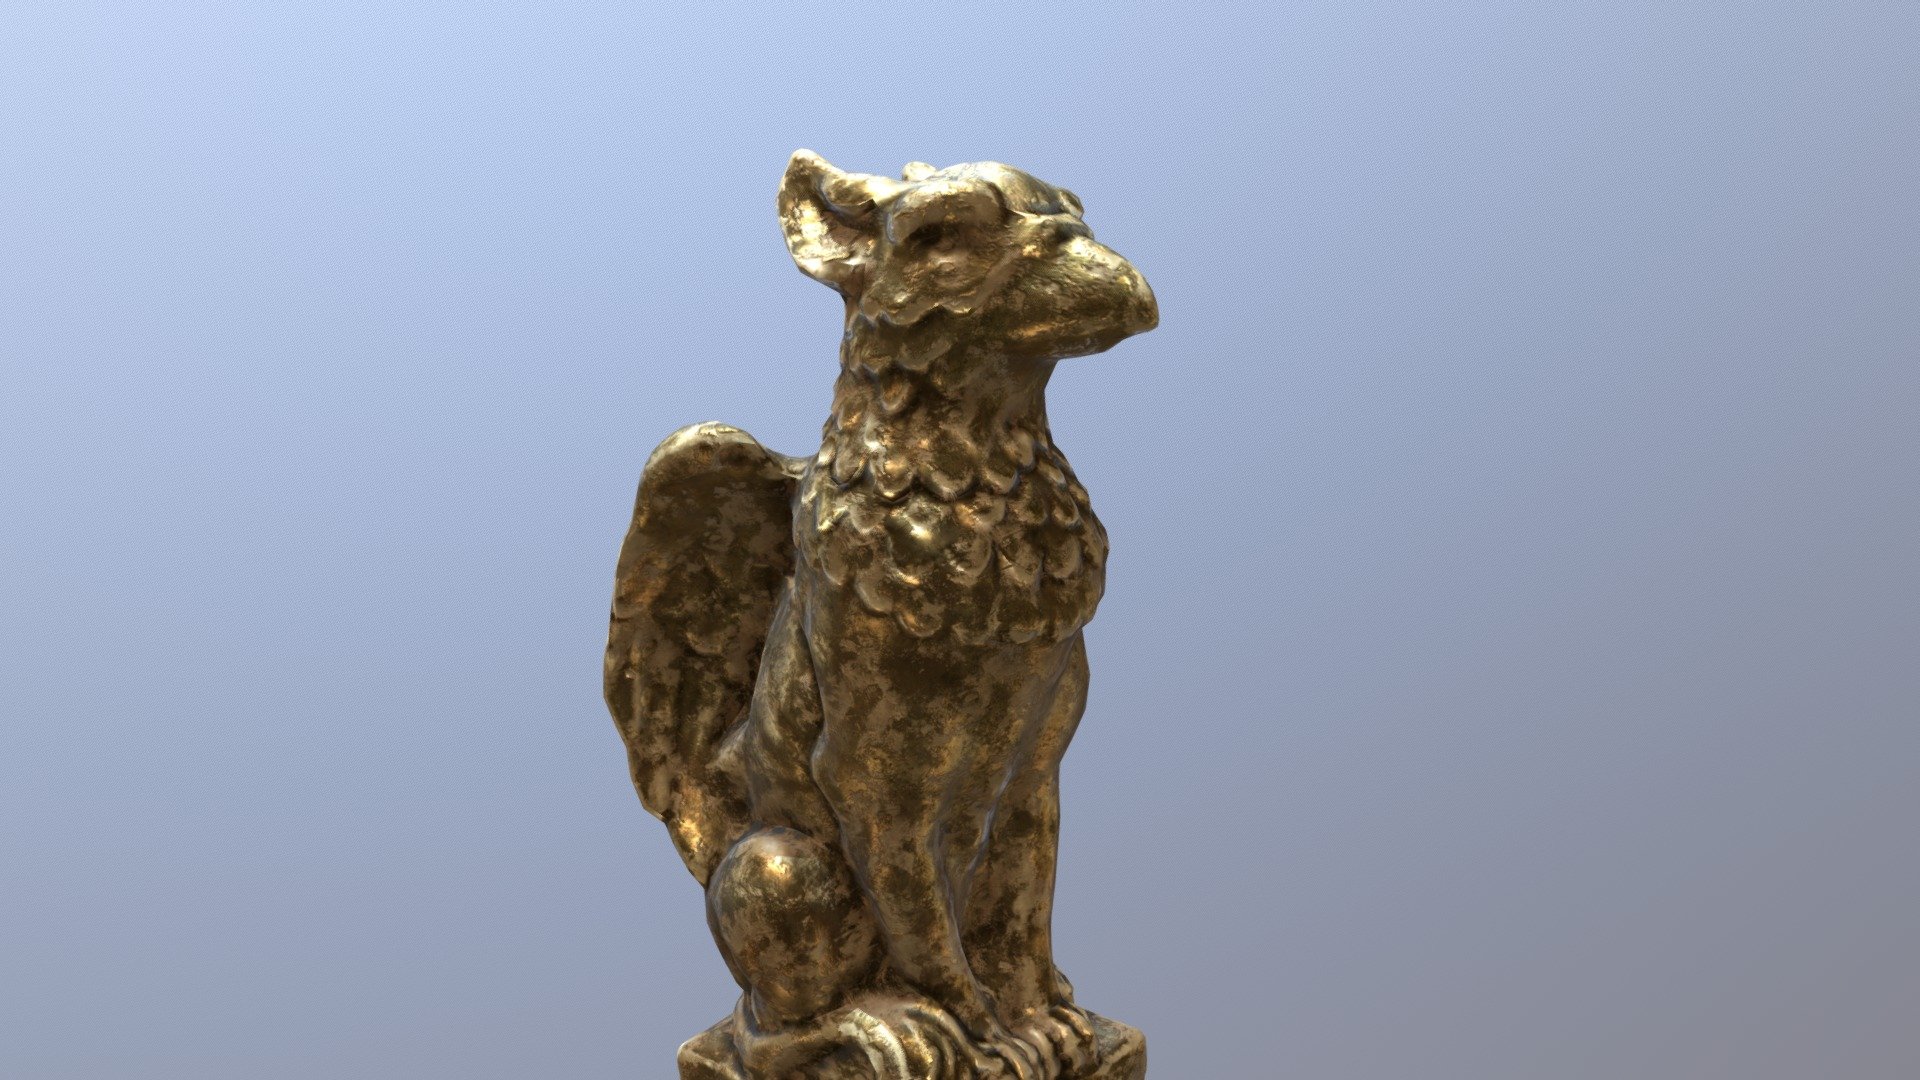 Griffon Statue - Griffon Statue - 3D model by Kailash H Kanojia (@KailashHKanojia) 3d model